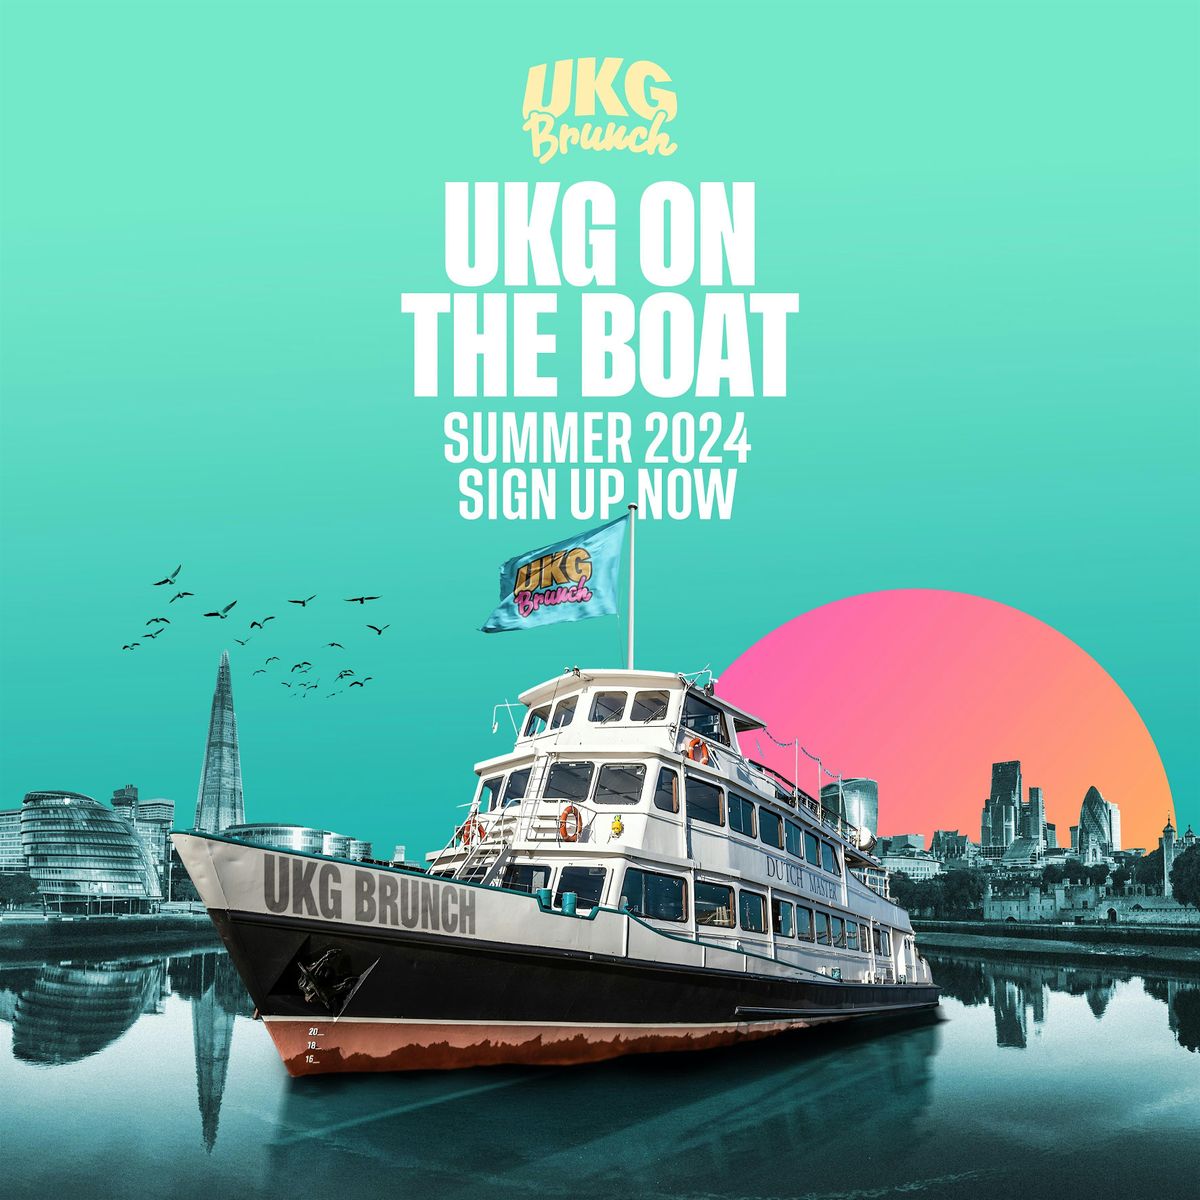 UKG ON THE BOAT (5TH OCT)